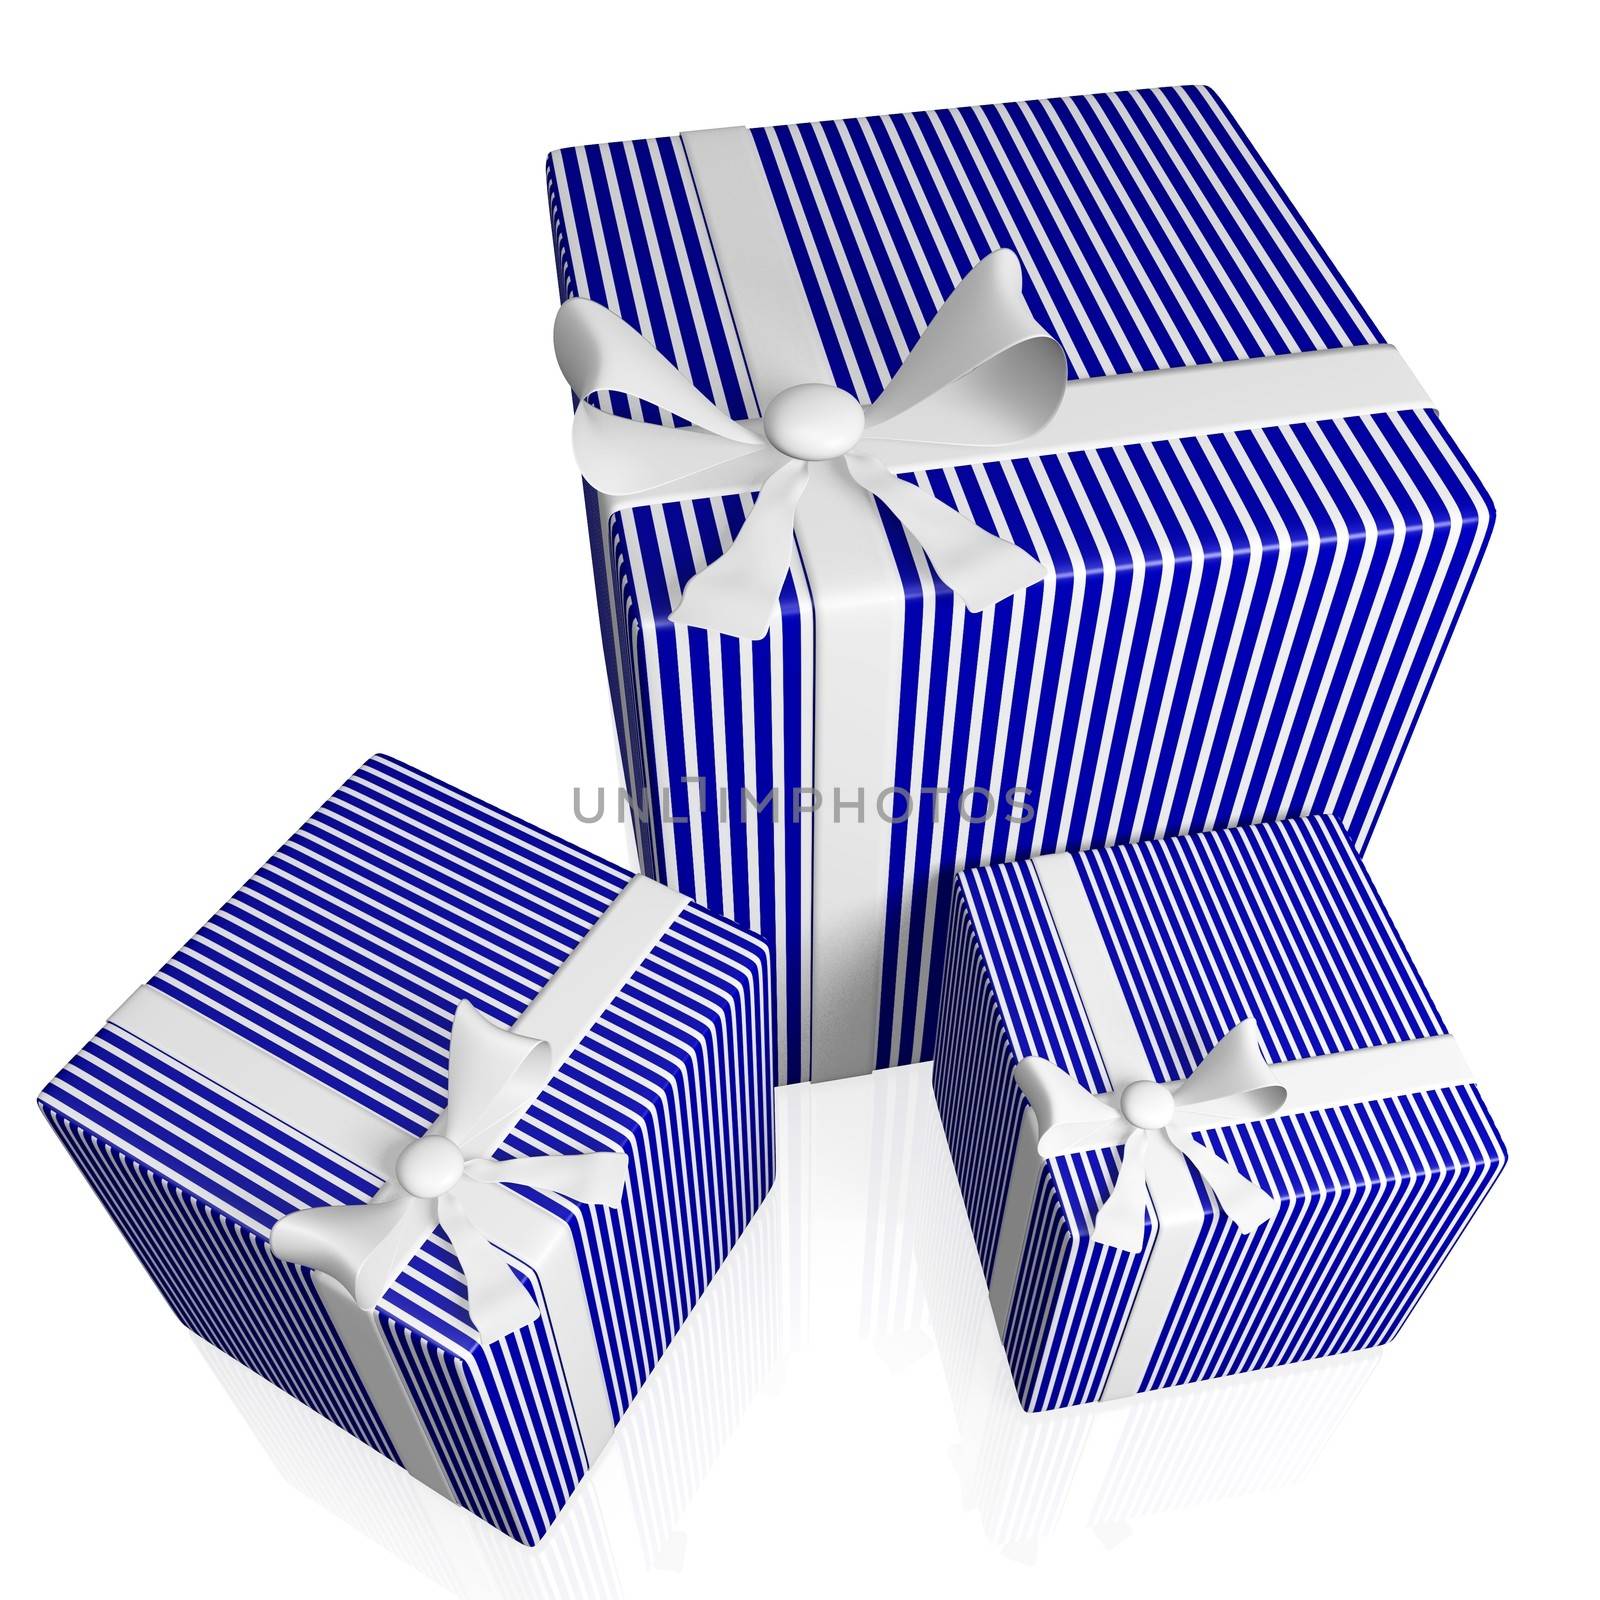 Three 3d gifts in blue stripes wrapping paper and white ribbon and bow
